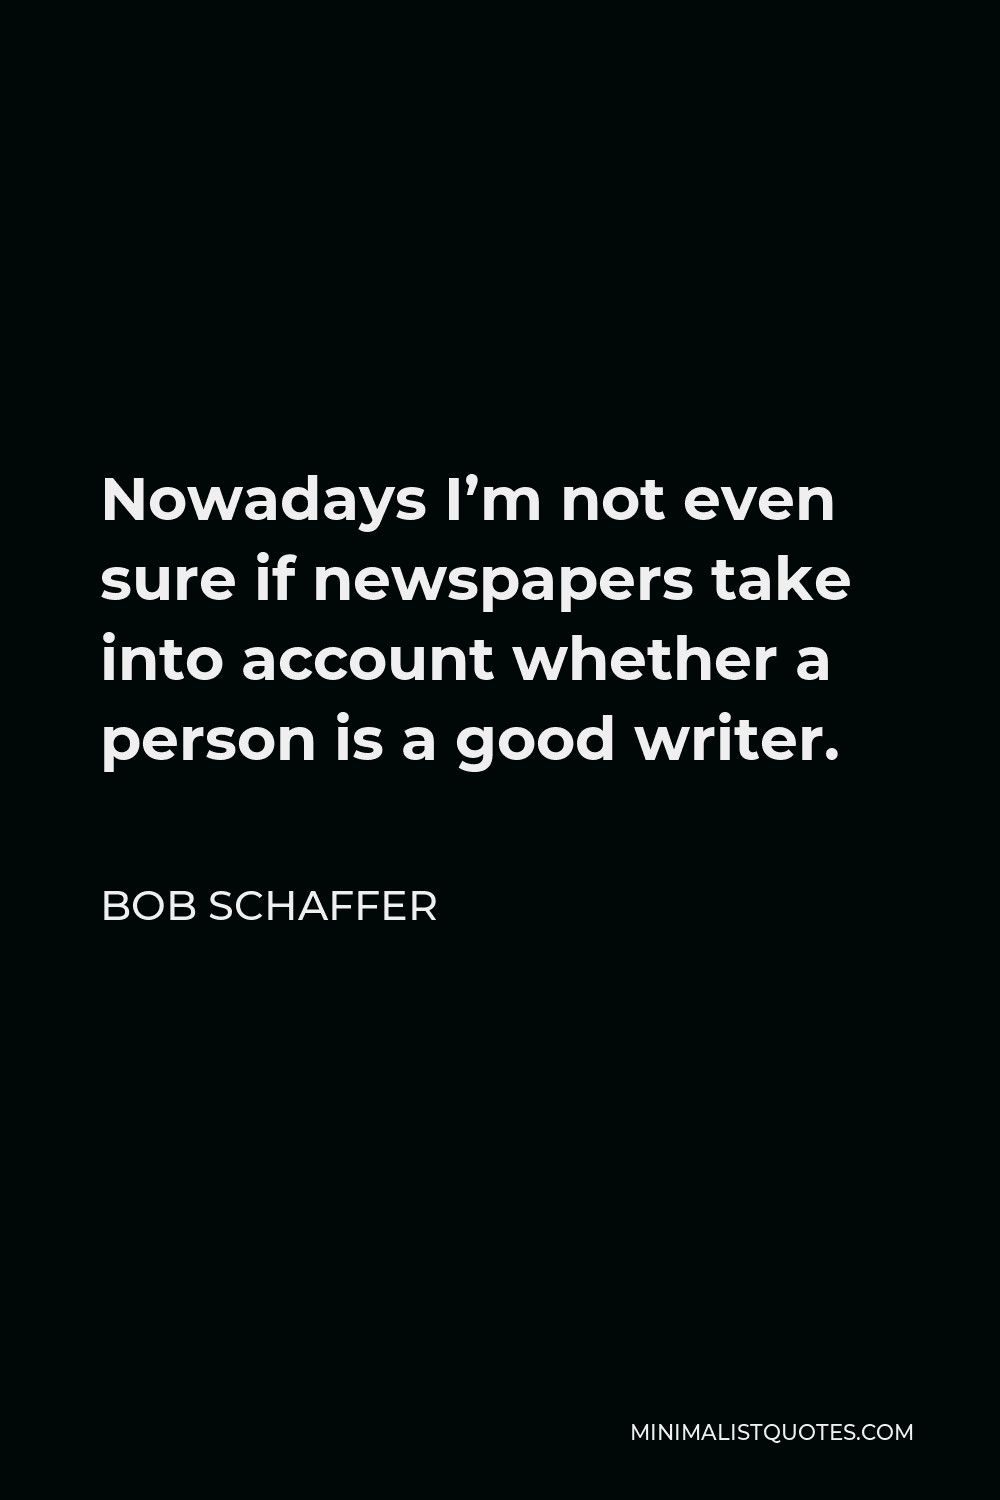 Bob Schaffer Quote - Nowadays I’m not even sure if newspapers take into account whether a person is a good writer.